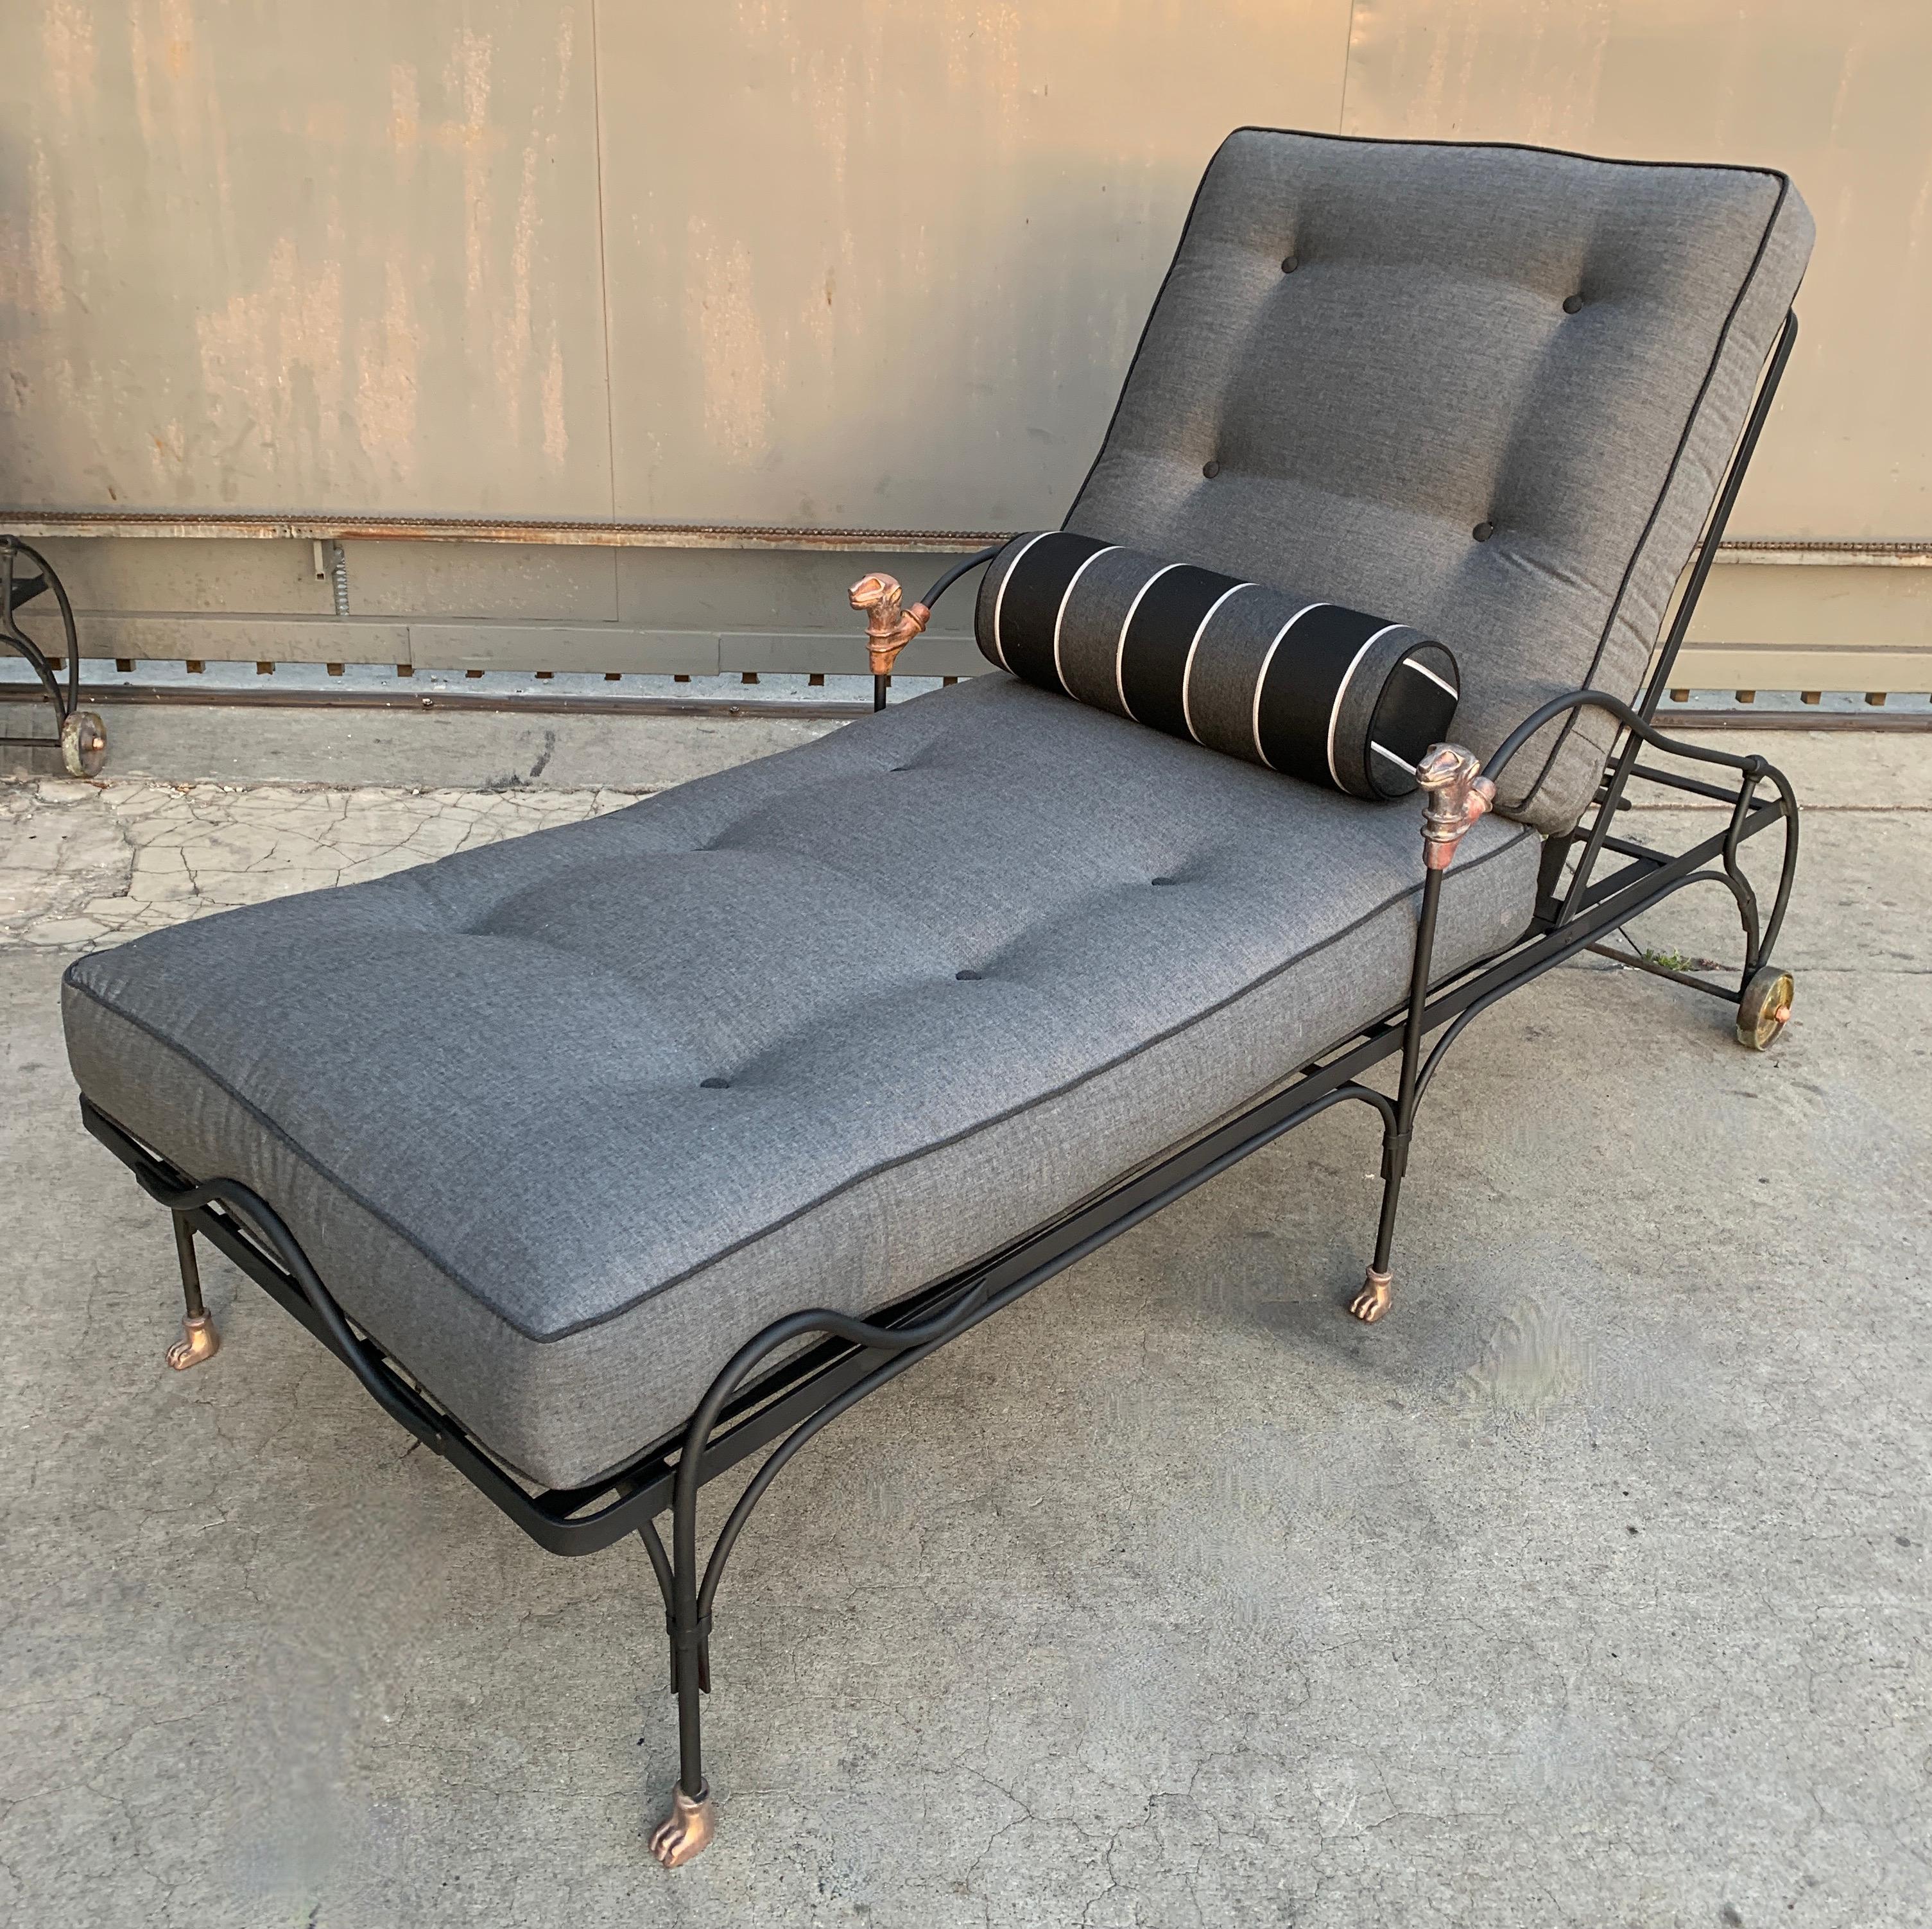 Four phenomenally designed outdoor wrought iron chaise lounges with sculpted head, paw feet and wheels sculpted of statuary bronze. The thoughtful design of the lounges has a curved handle at the base and head of the lounge for ease of movement. The